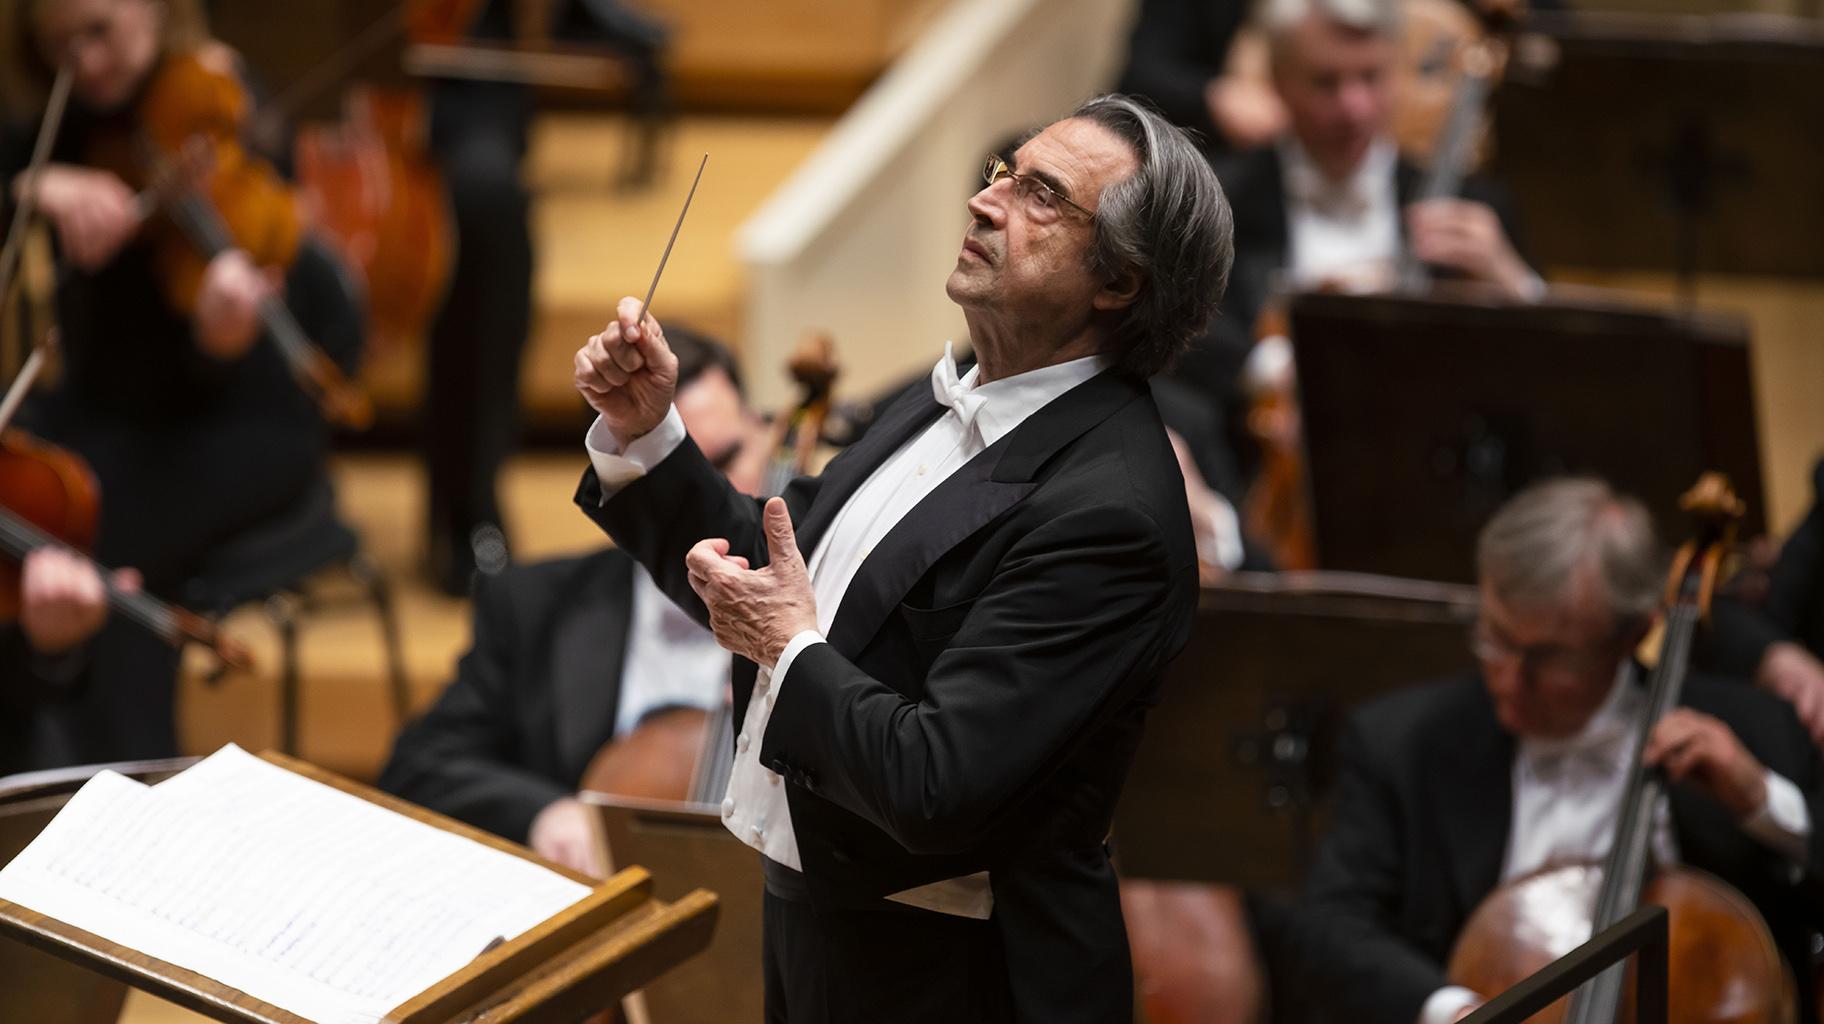 Zell Music Director Riccardo Muti on the podium during the CSO’s May 9, 2019 program of works by Mozart and Stravinsky. (Photo credit: Todd Rosenberg)